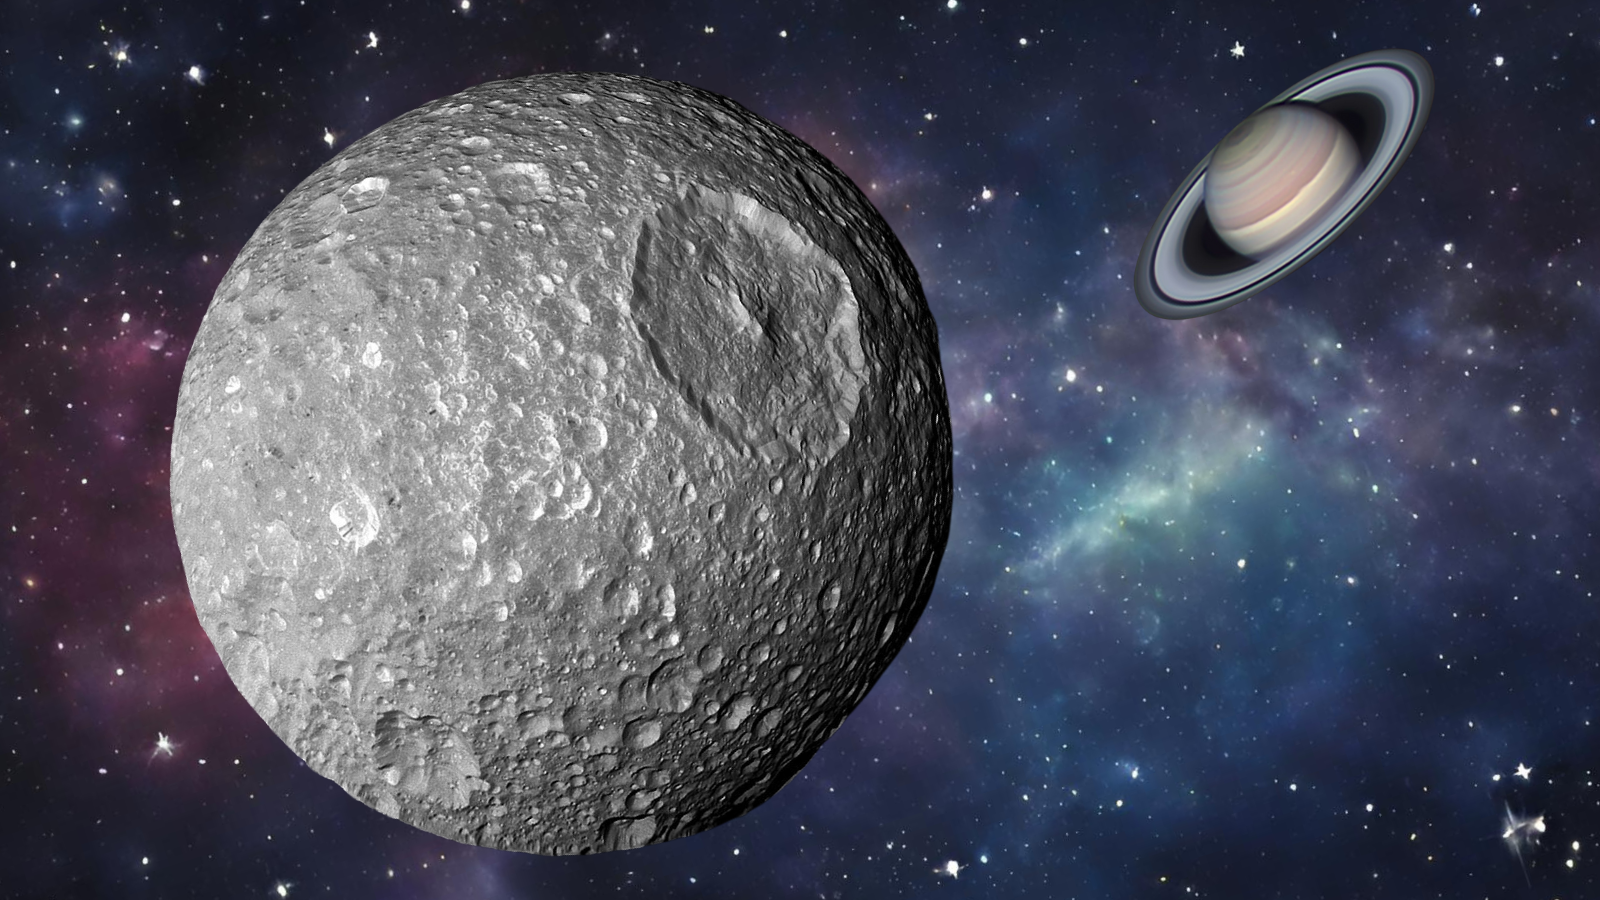 Saturn's 'Death Star' moon Mimas may have gotten huge buried ocean from ringed planet's powerful pull